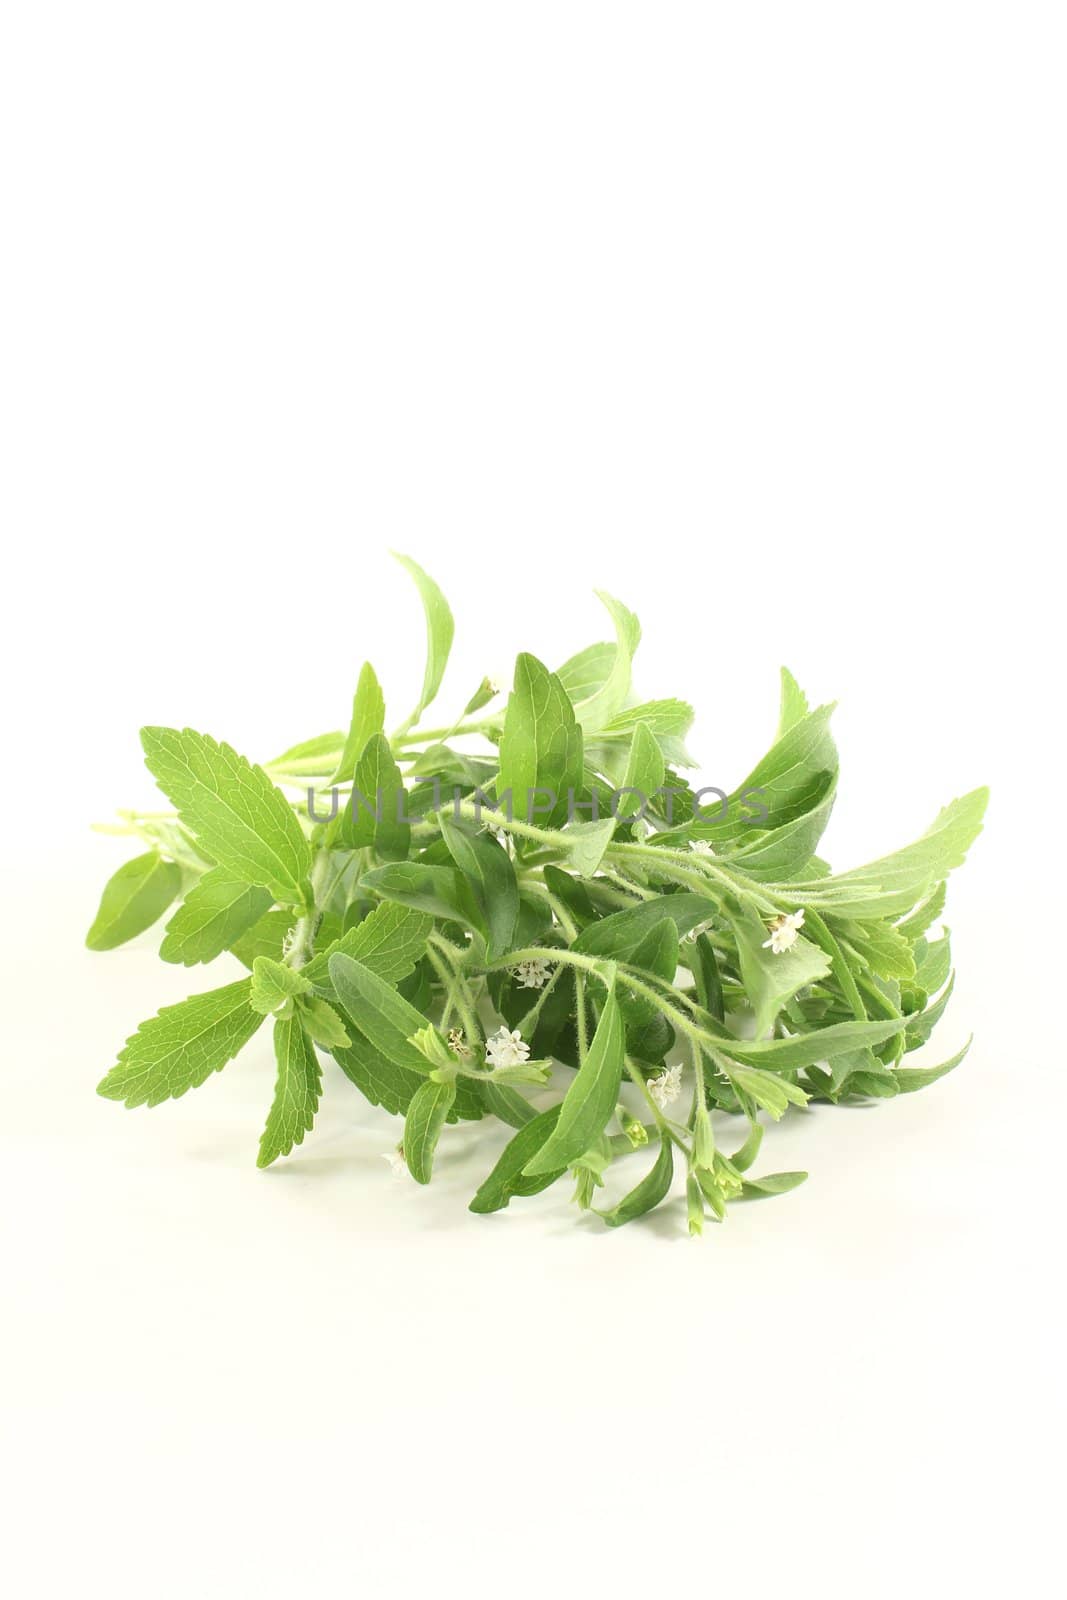 Stevia with flowers by discovery